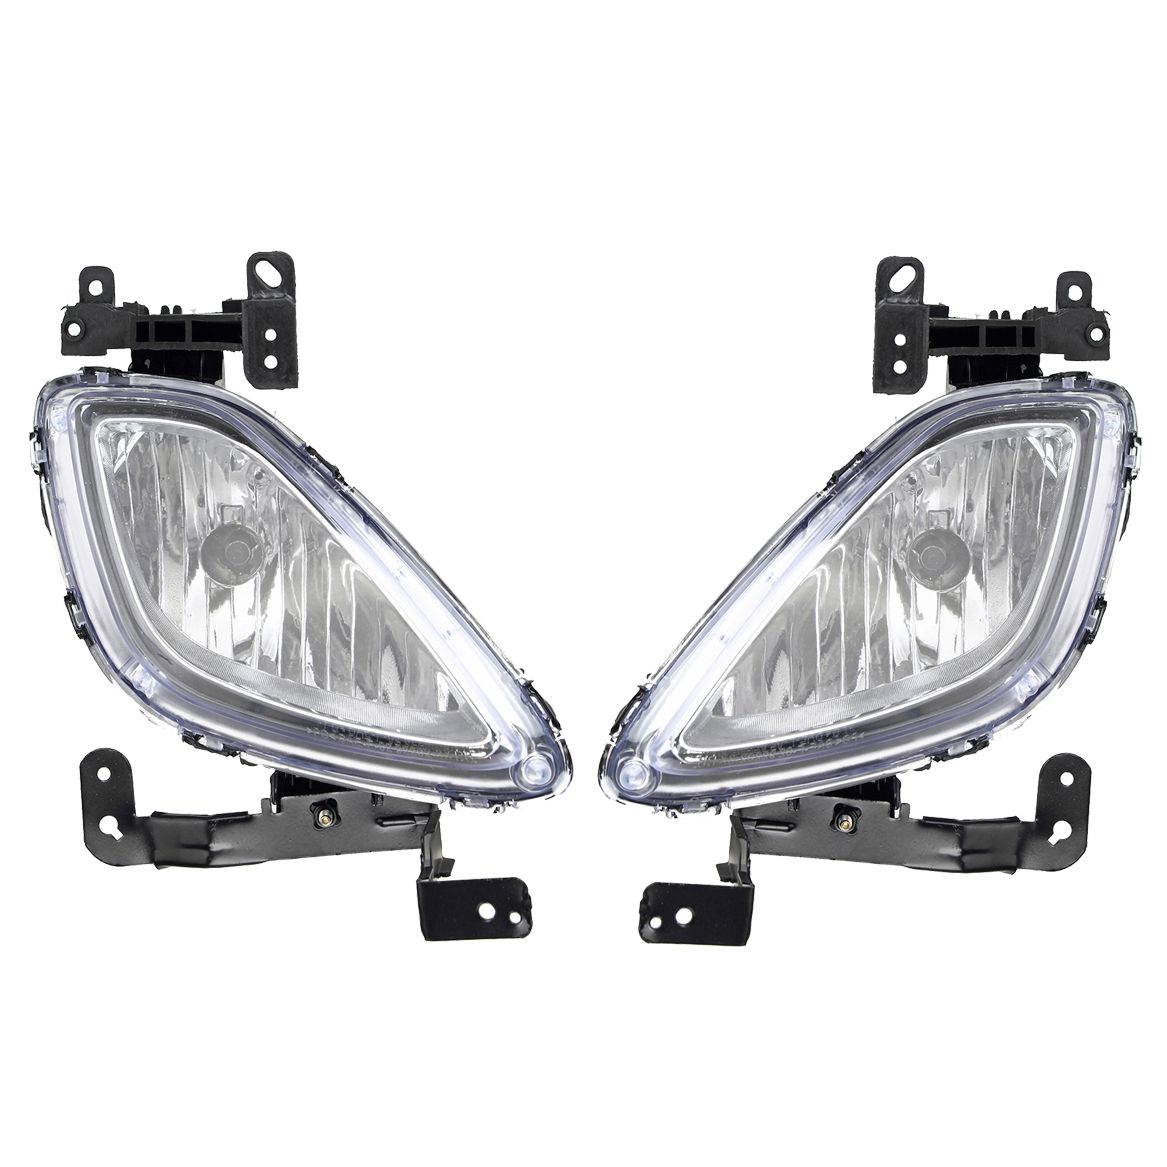 Car-Front-Bumper-Fog-Lights-Lamps-with-Halogen-Bulb-Wiring-Pair-for-Hyundai-Elantra-2011-2013-1424648